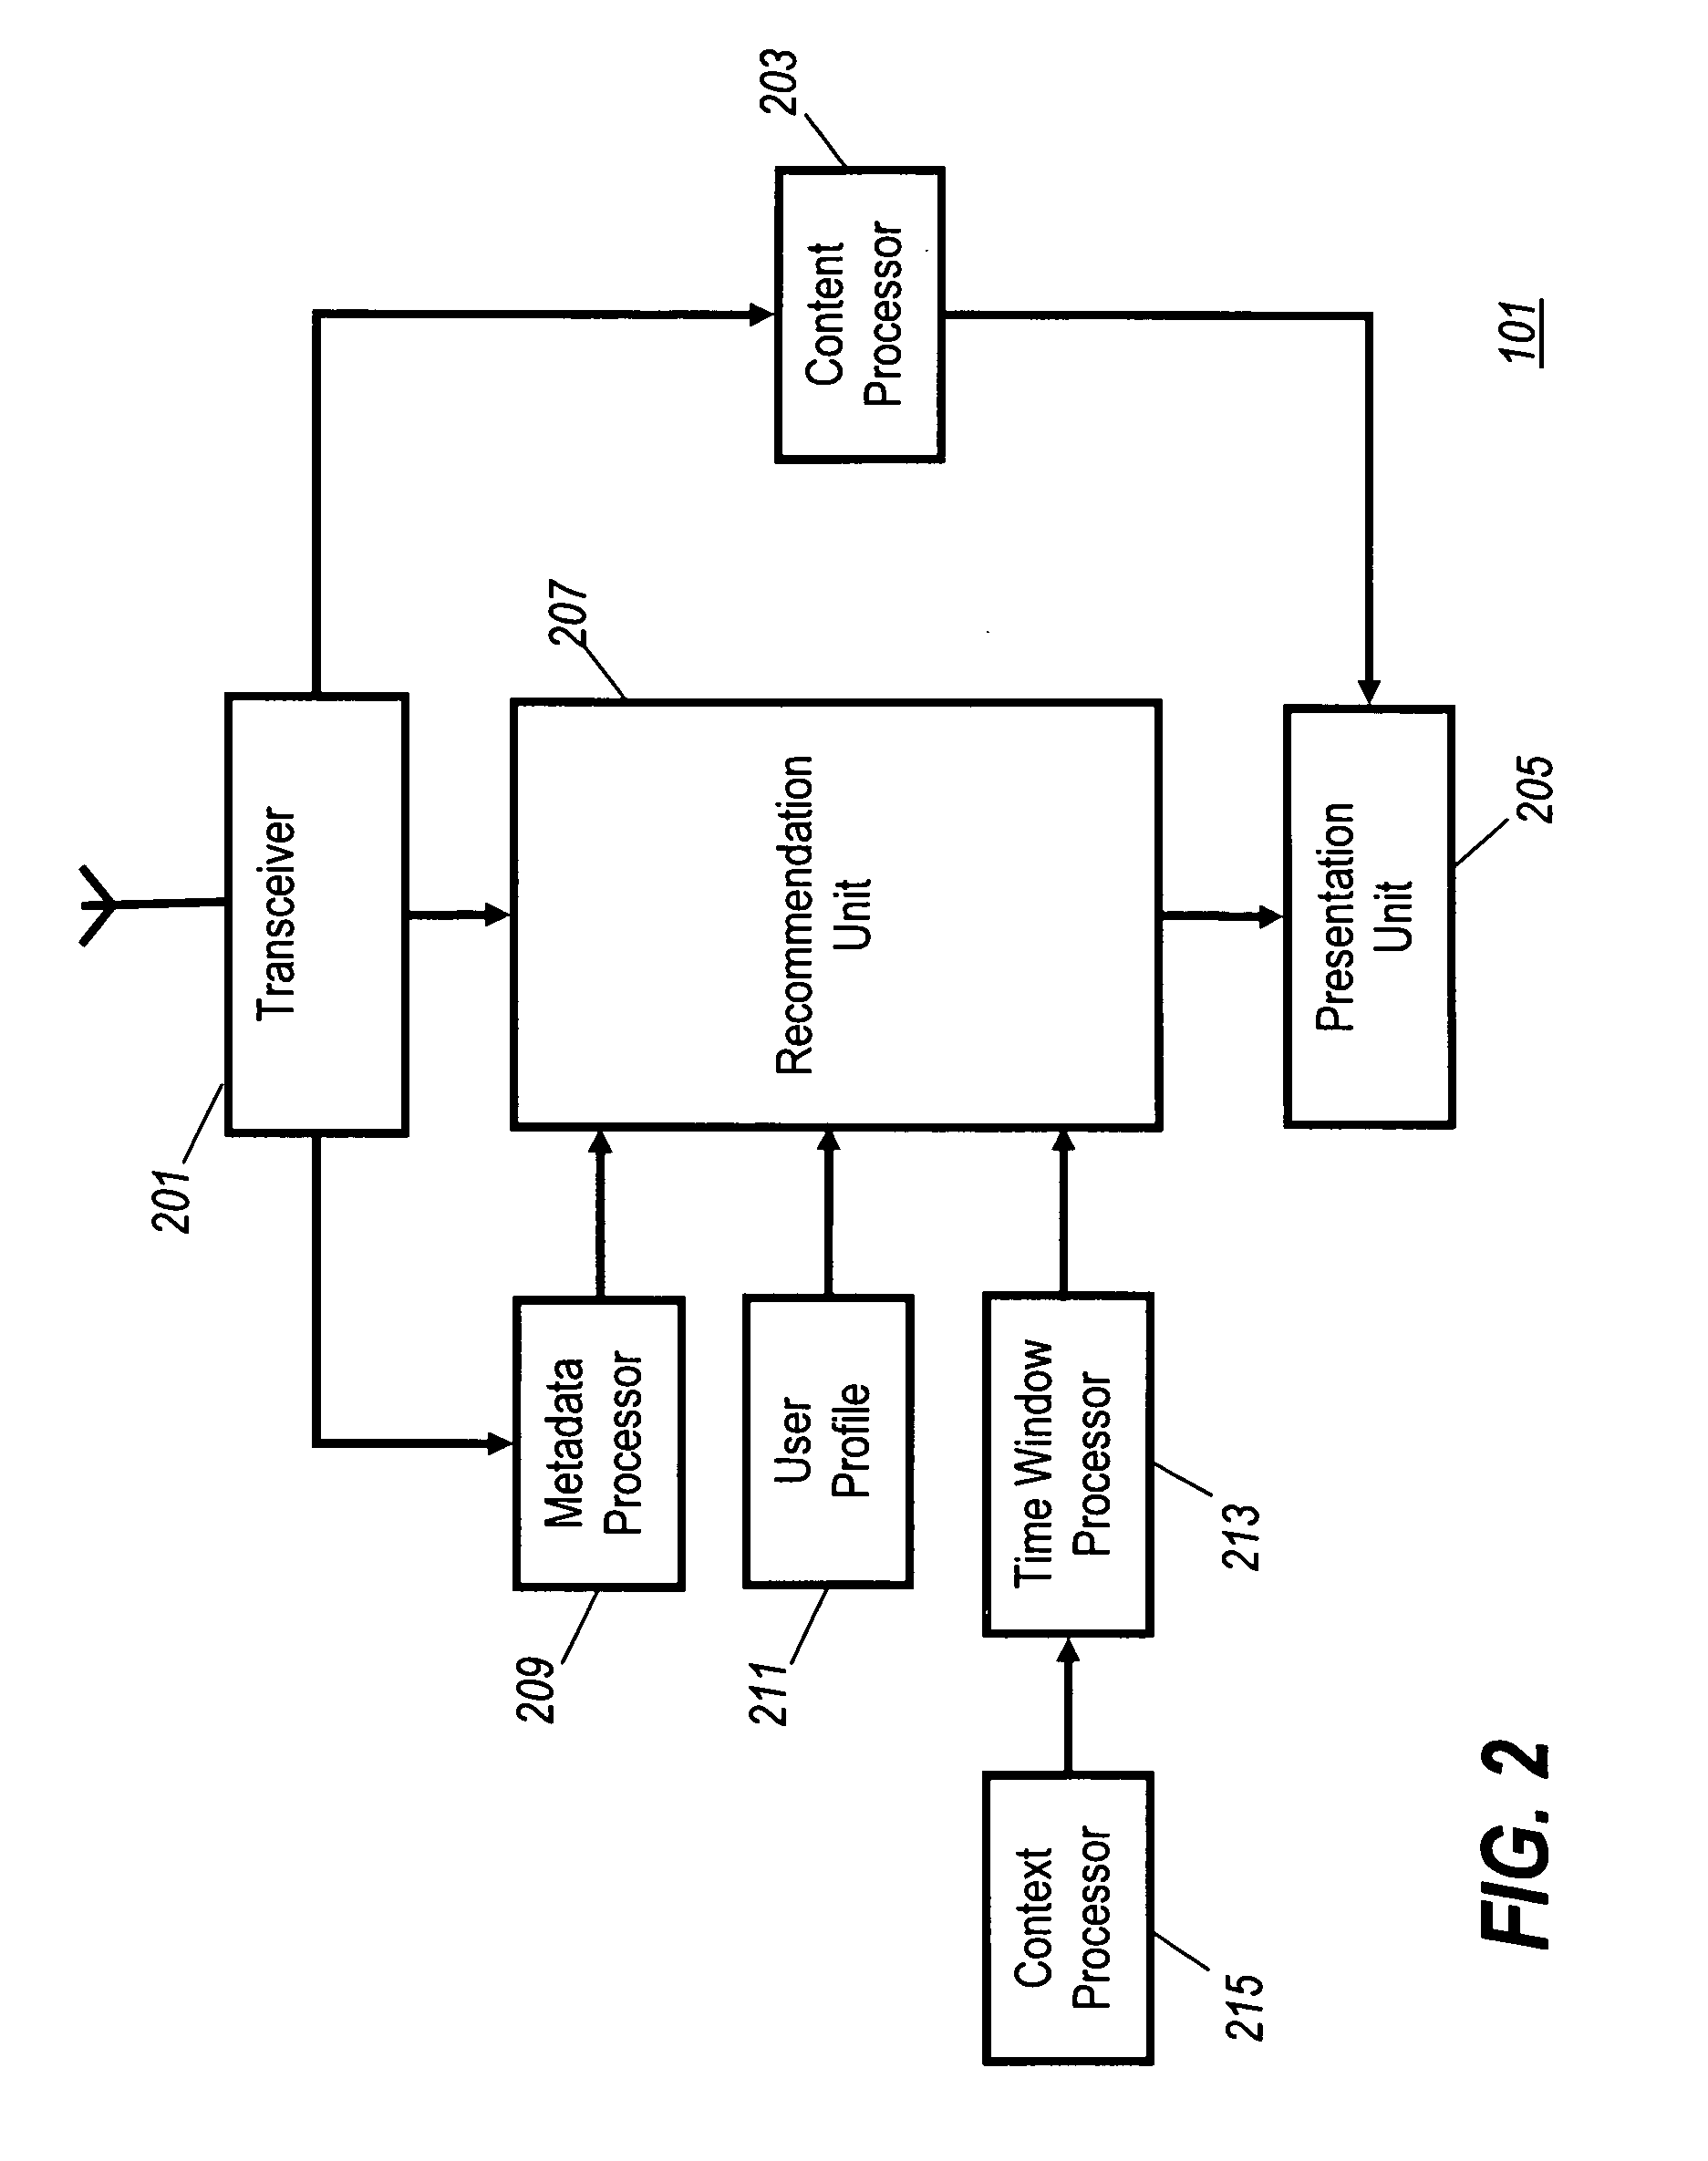 Apparatus and method for generating content program recommendations